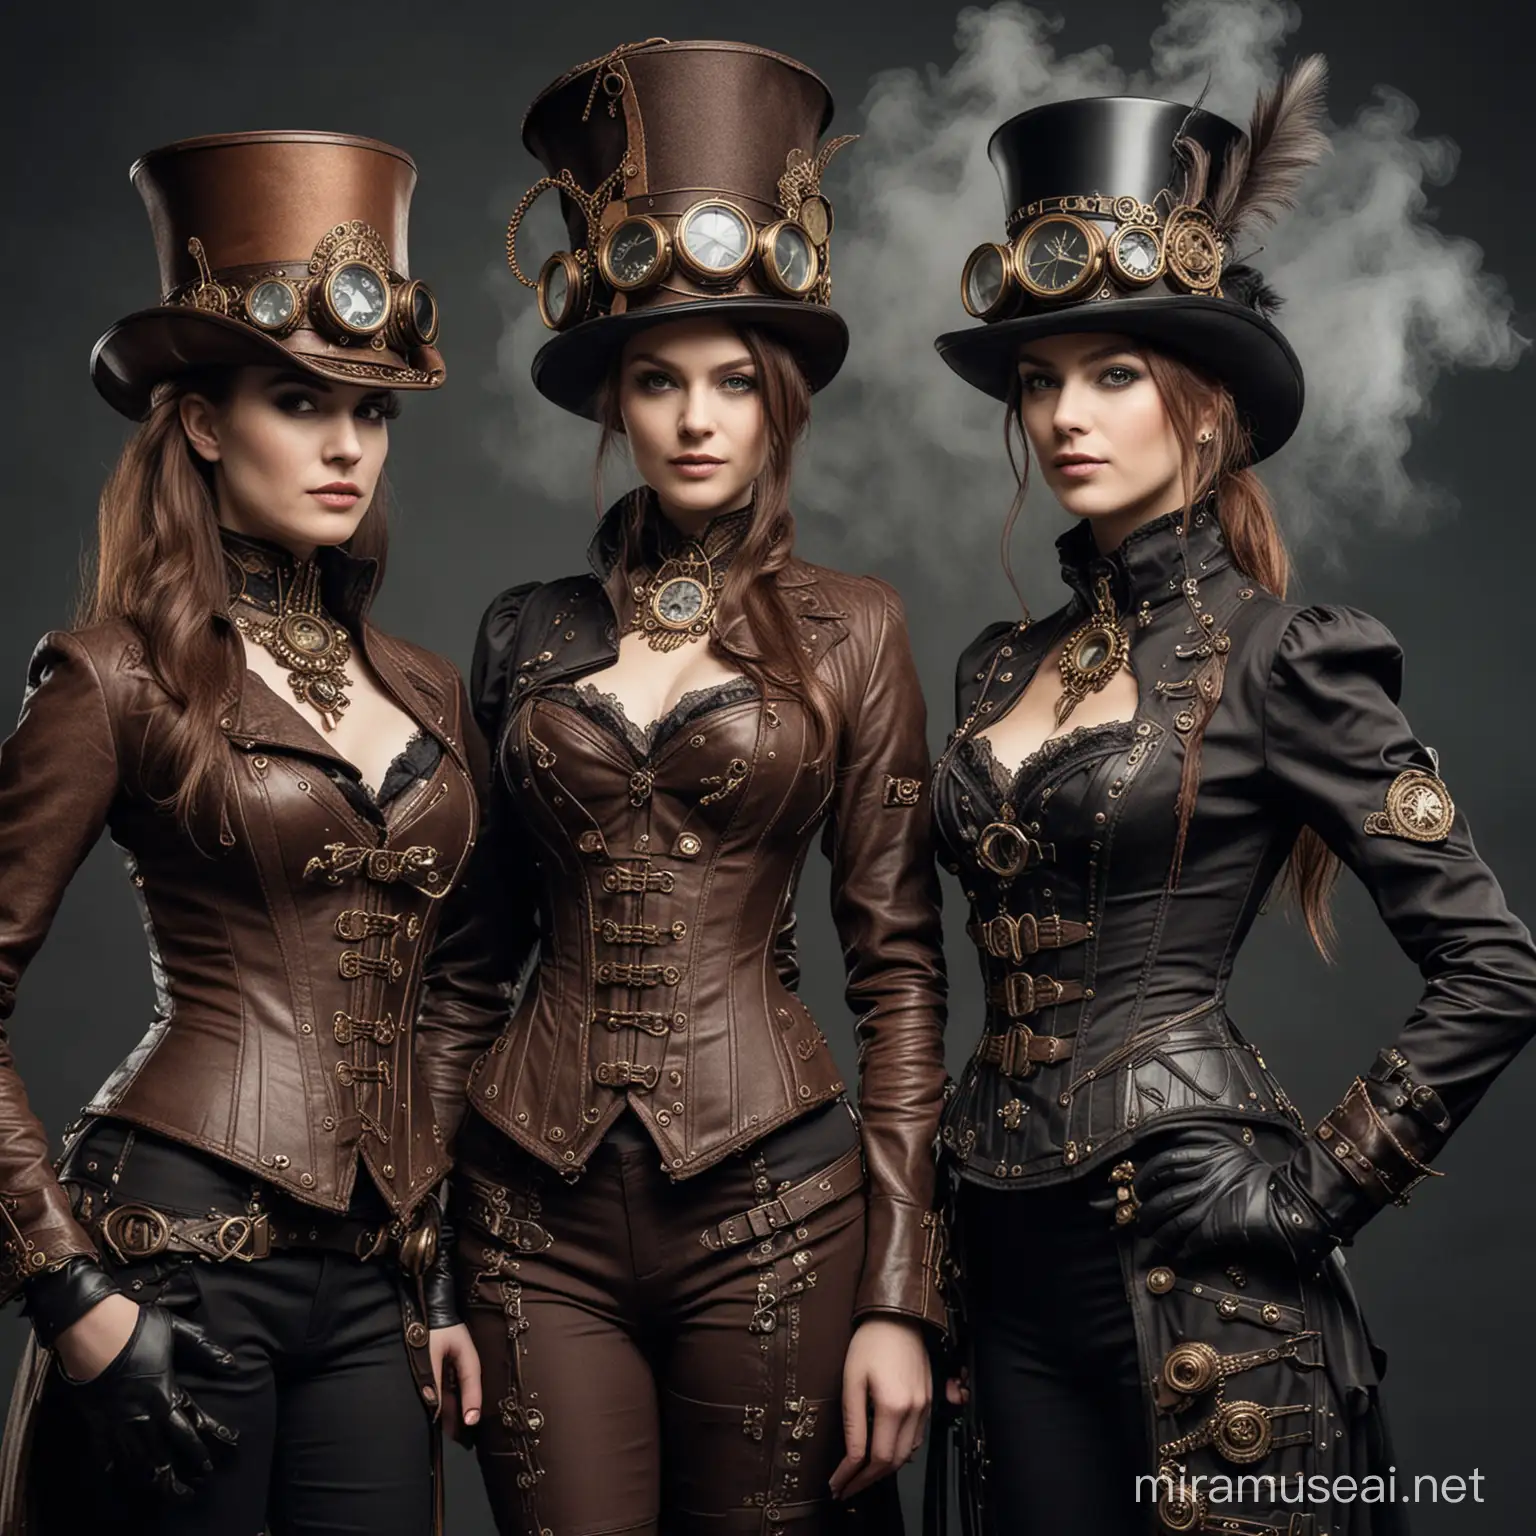  In a world where style is as important as innovation, rival fashion houses compete for dominance in the steampunk fashion scene. Their creations blend corsets, top hats, and goggles with intricate clockwork accessories and steam-powered embellishments, captivating audiences with their daring designs.
